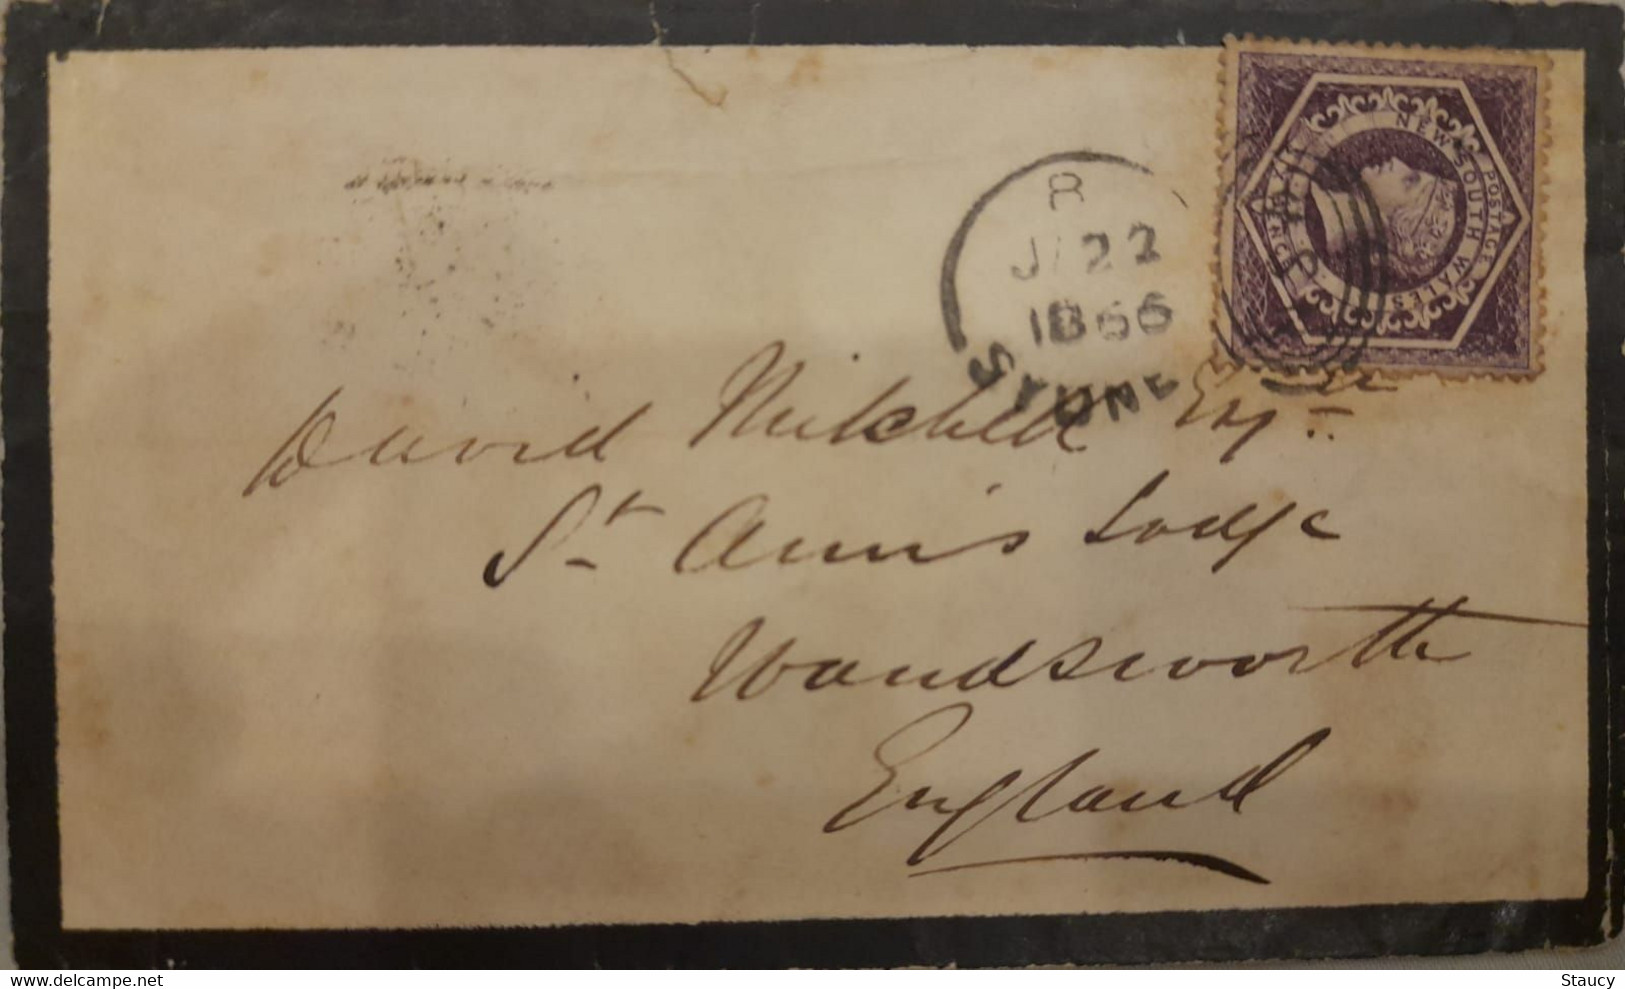 AUSTRALIA NEW SOUTH WALES 1866 NSW - GB 6d Diadem (Sg#166) Sydney To London NSW OVAL RING CANCELLATION - Lettres & Documents